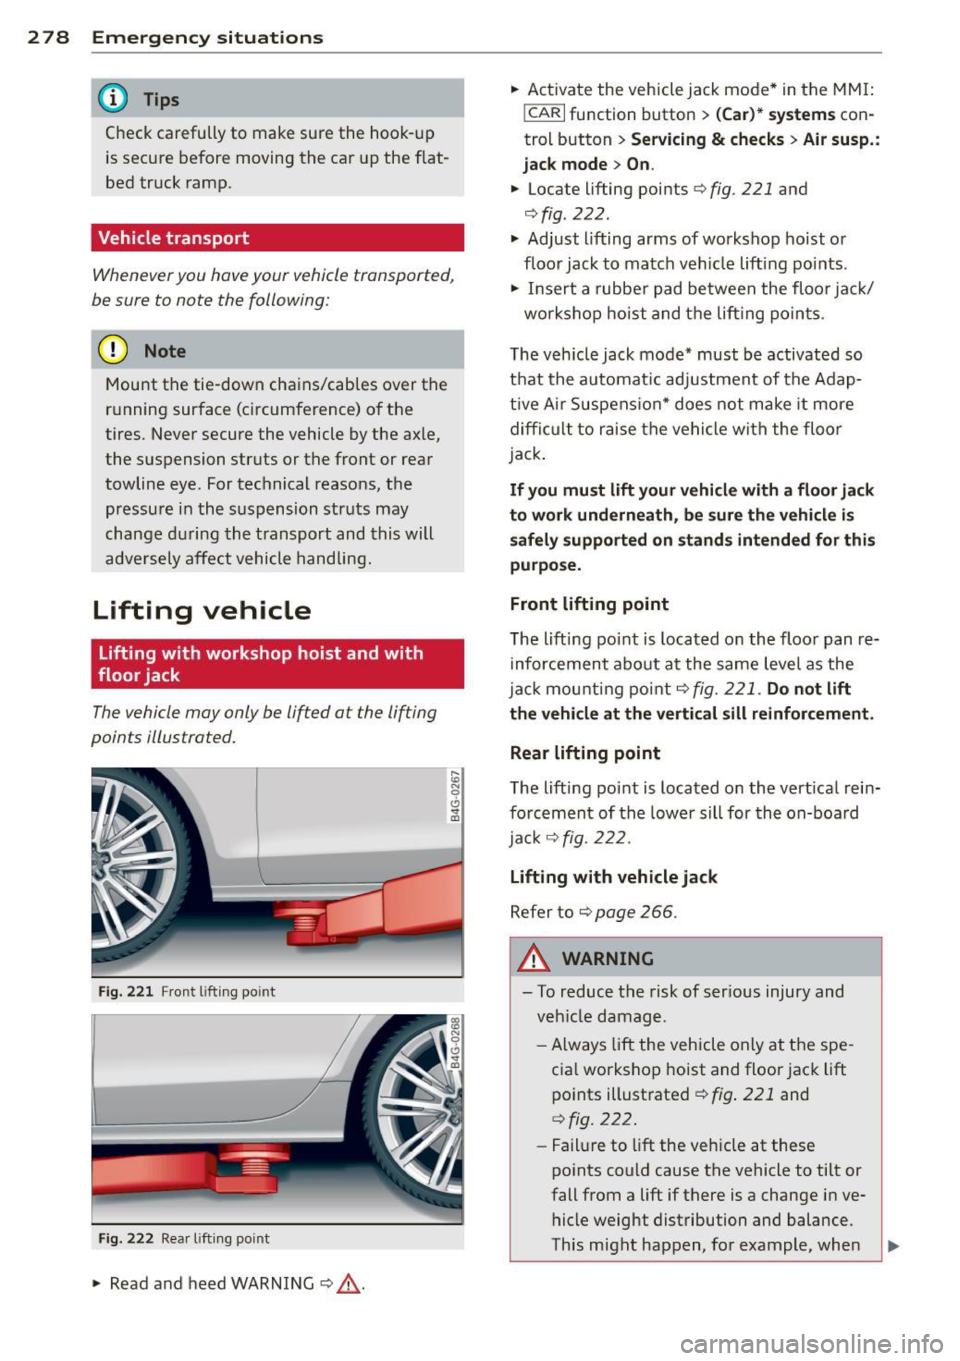 AUDI S6 2013  Owners Manual 2 78  Emergency  situations 
@ Tips 
Check carefully  to  make  sure  the  hook-up 
is secure  before  moving  the  car  up the  flat­
bed  truck  ramp. 
Vehicle  transport 
Whenever you  have your  